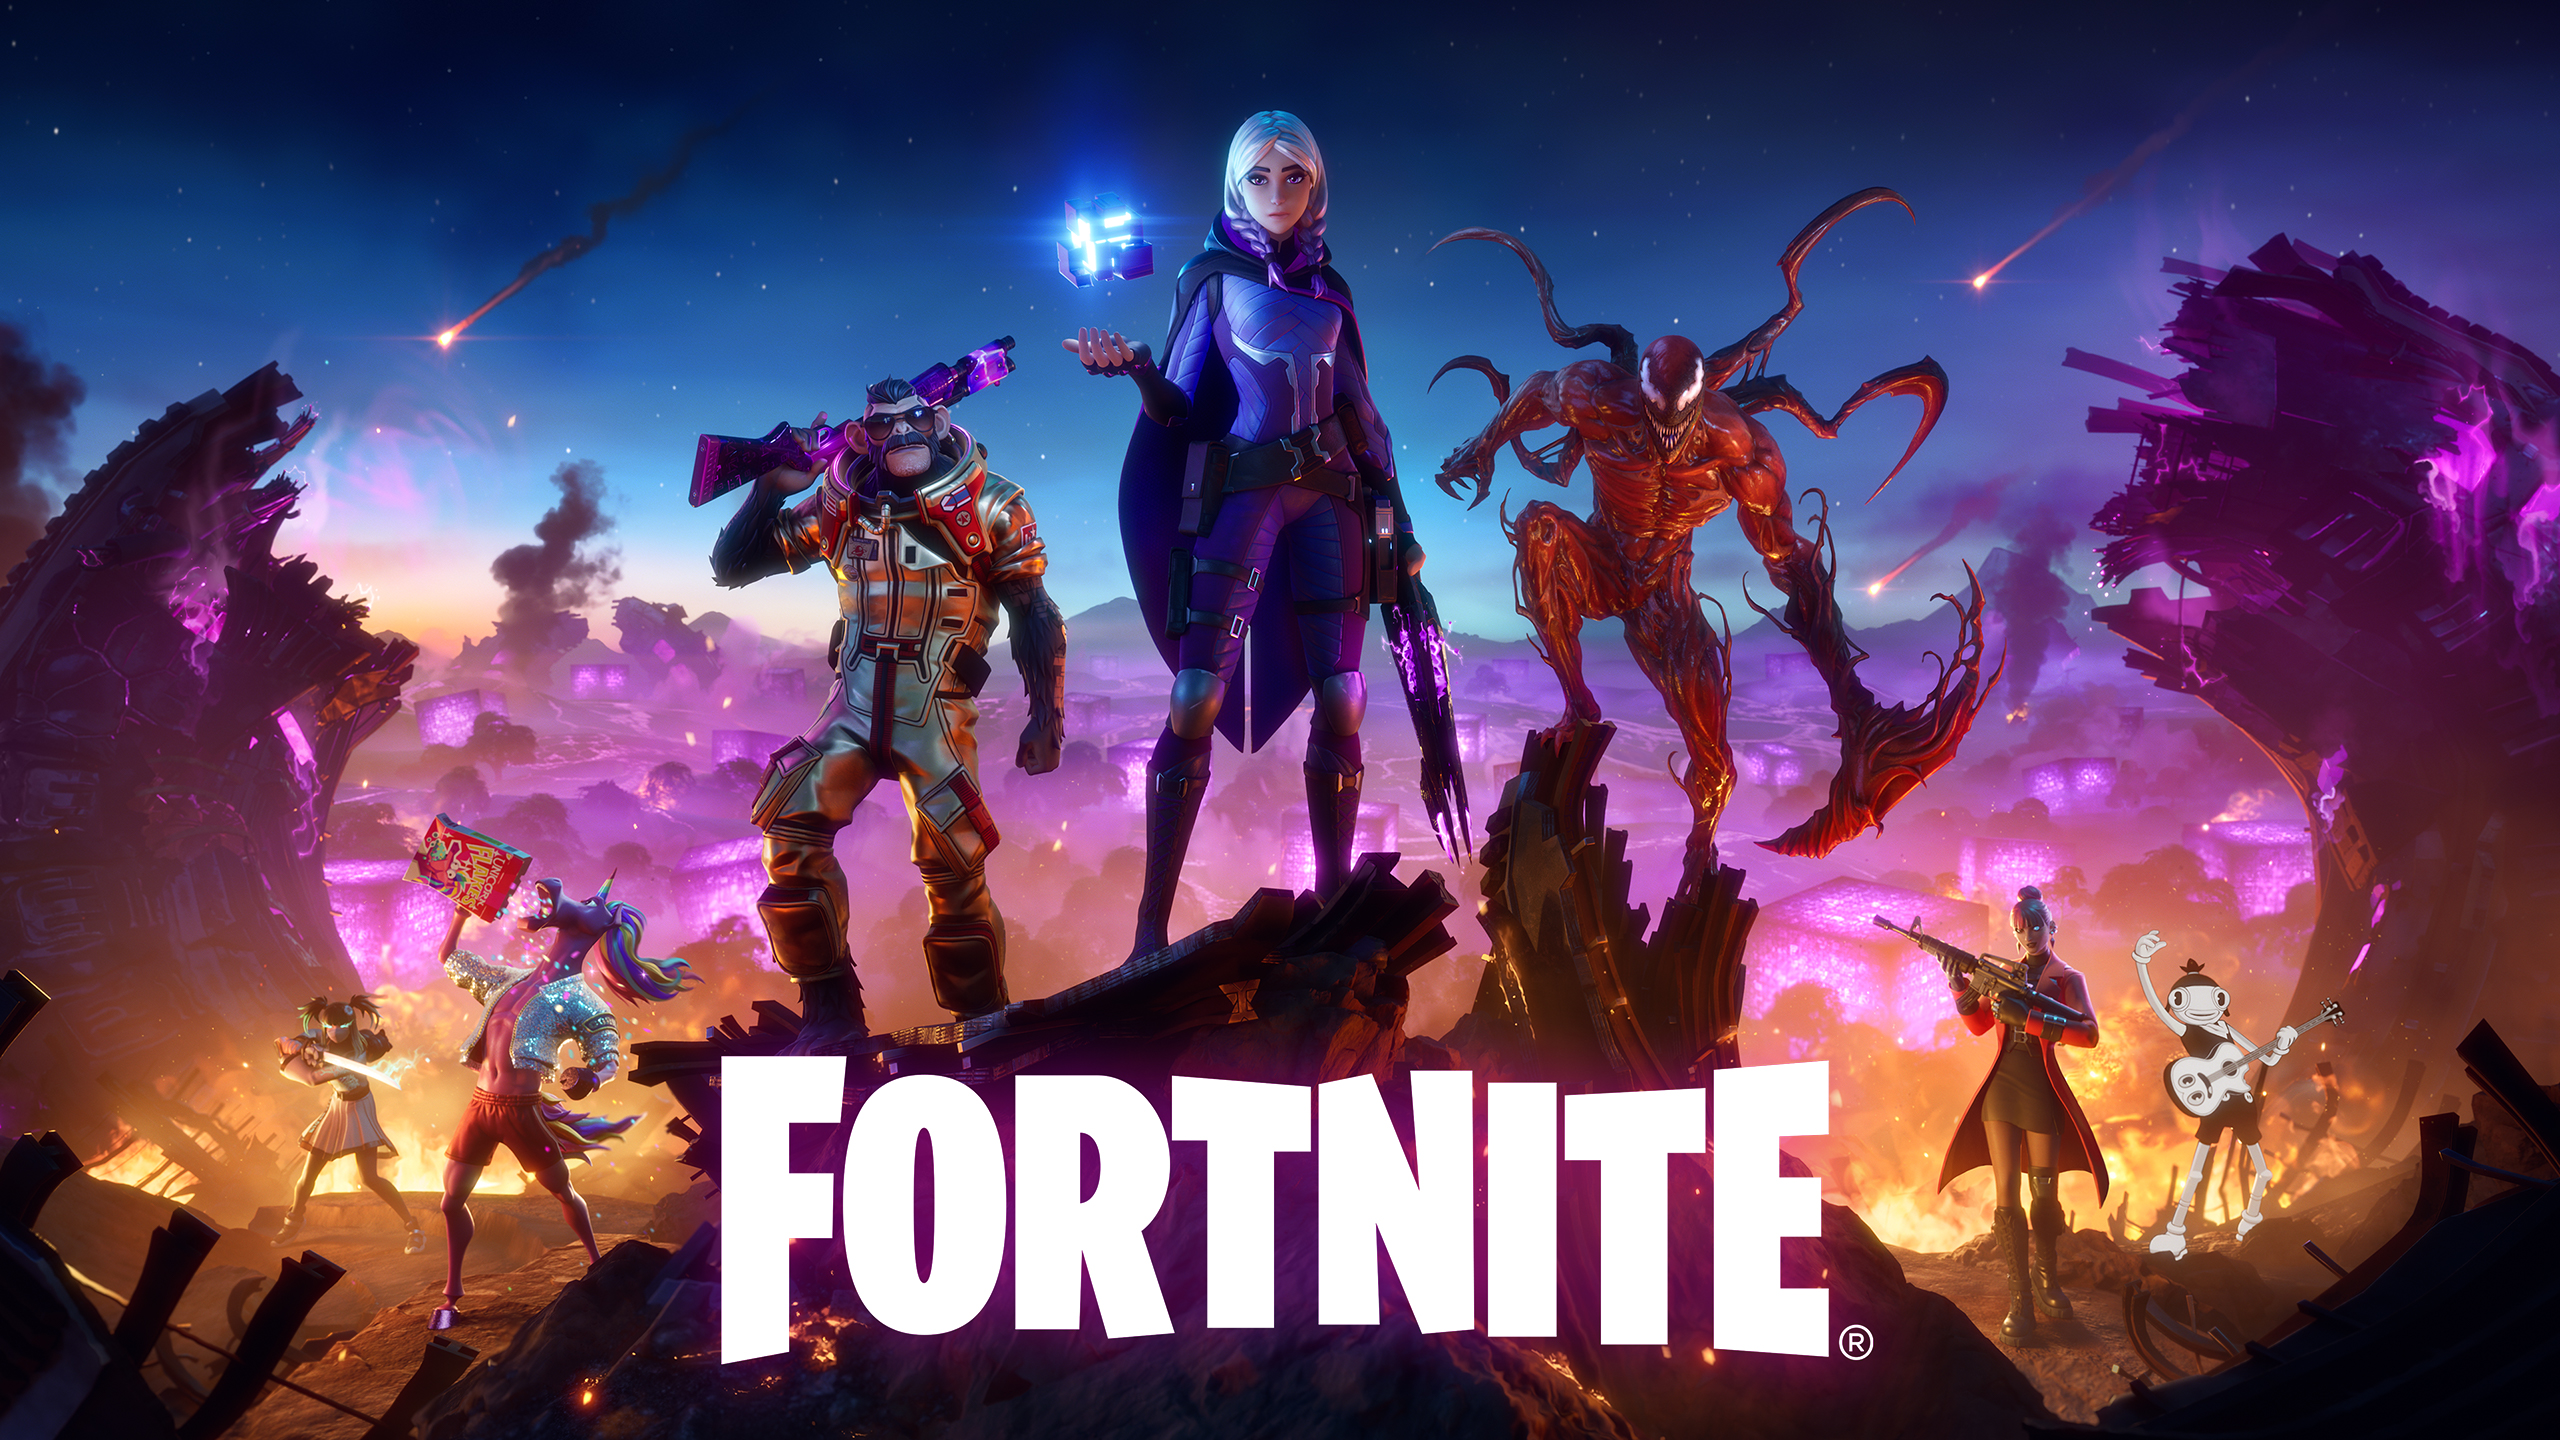 Marketing image for the game Fortnite. Various characters stand facing the